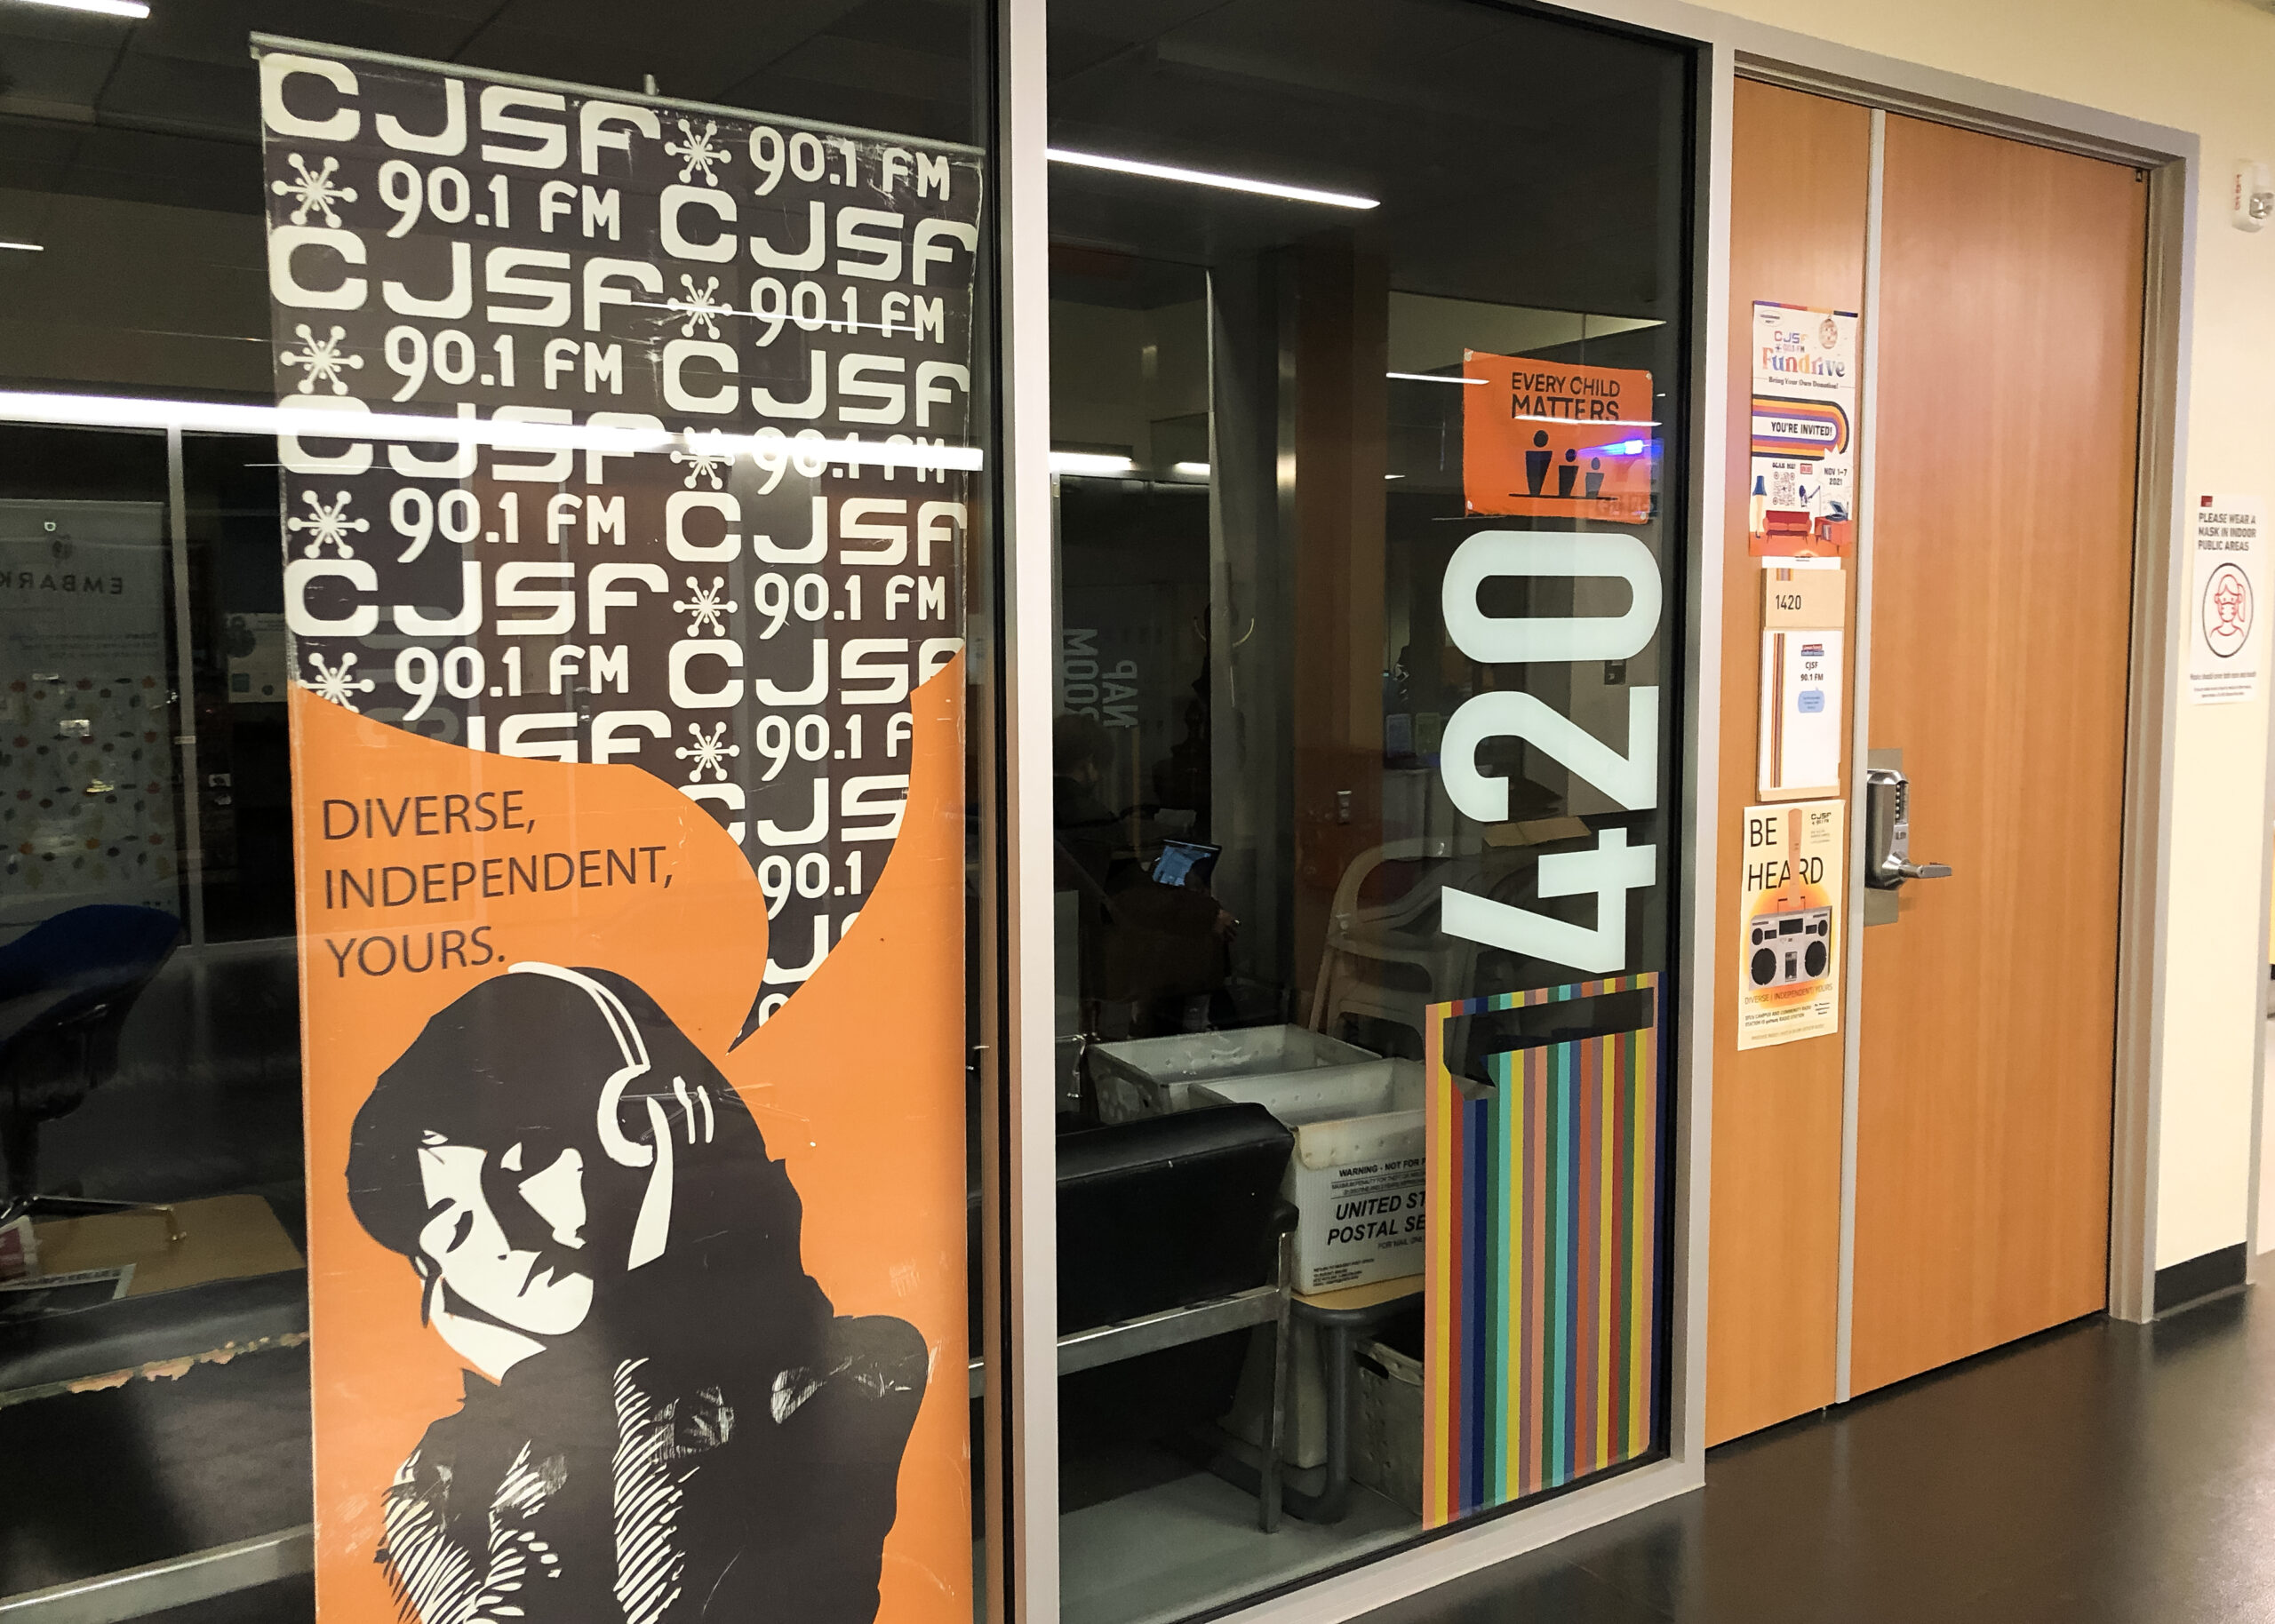 Exterior of the CJSF radio station. An orange banner with their slogan “Diverse, Independent, Yours” can be seen from the floor to ceiling windows